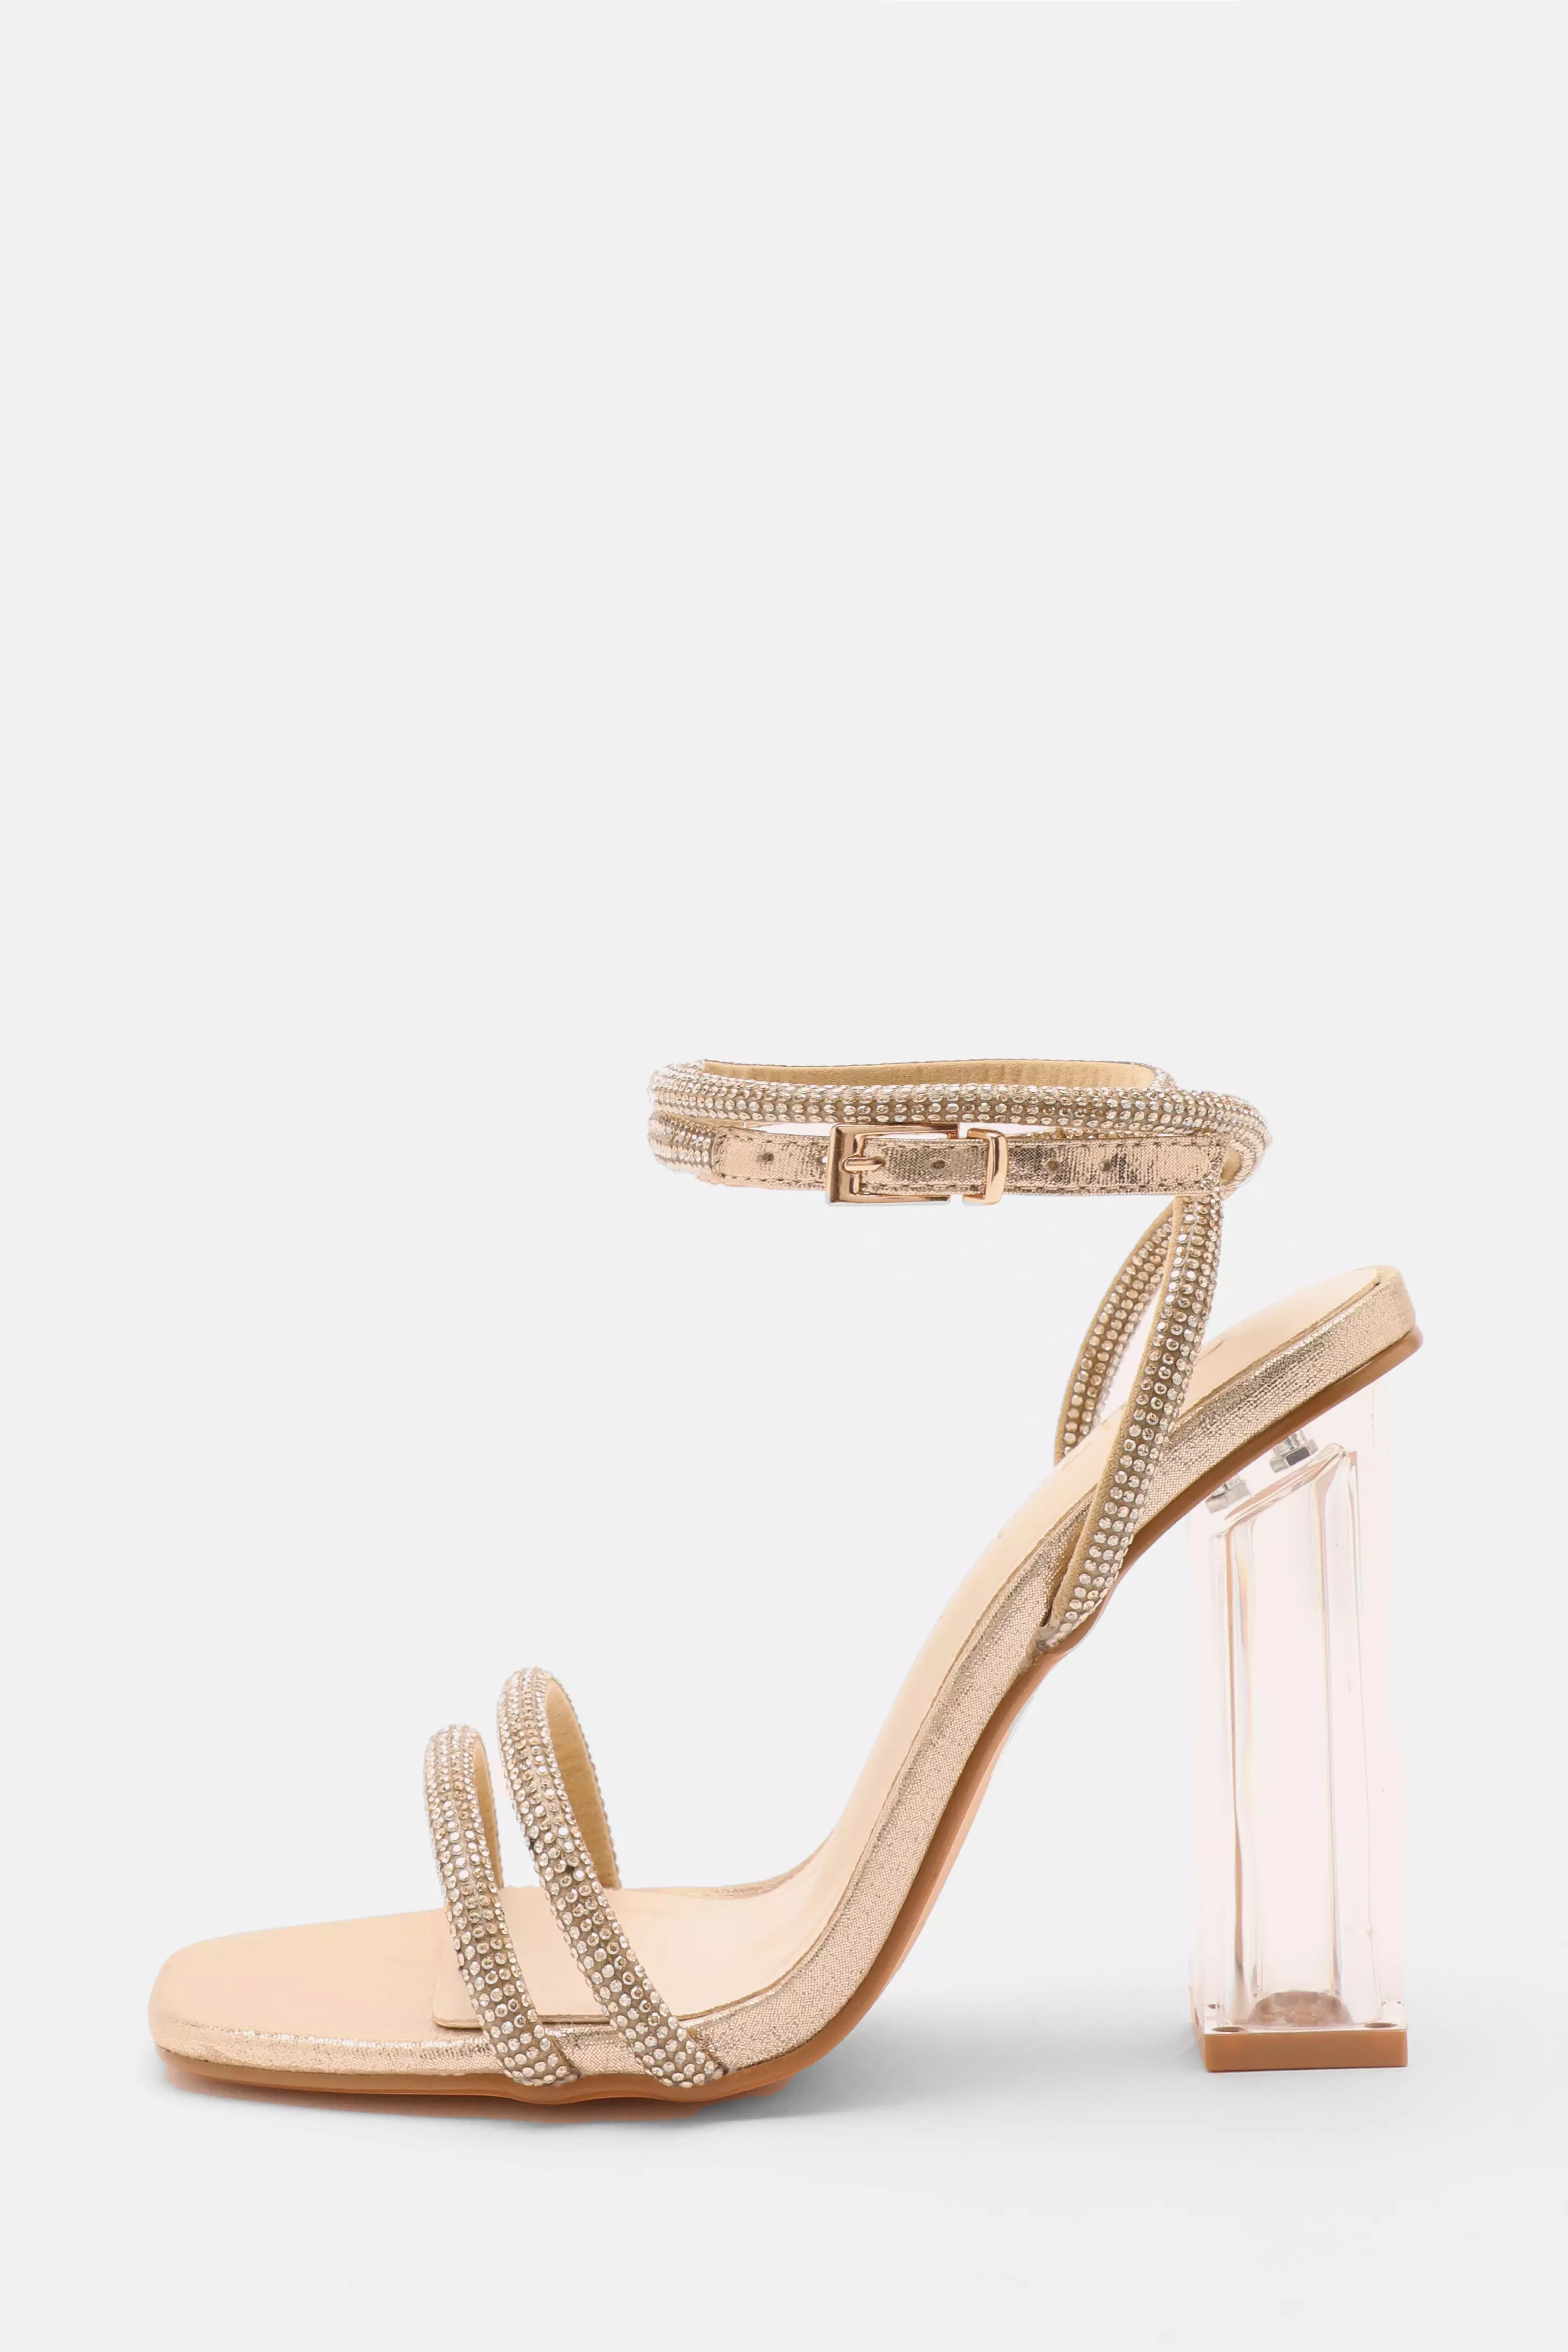 Wide Fit Gold Diamante Clear Heeled Sandals - QUIZ Clothing